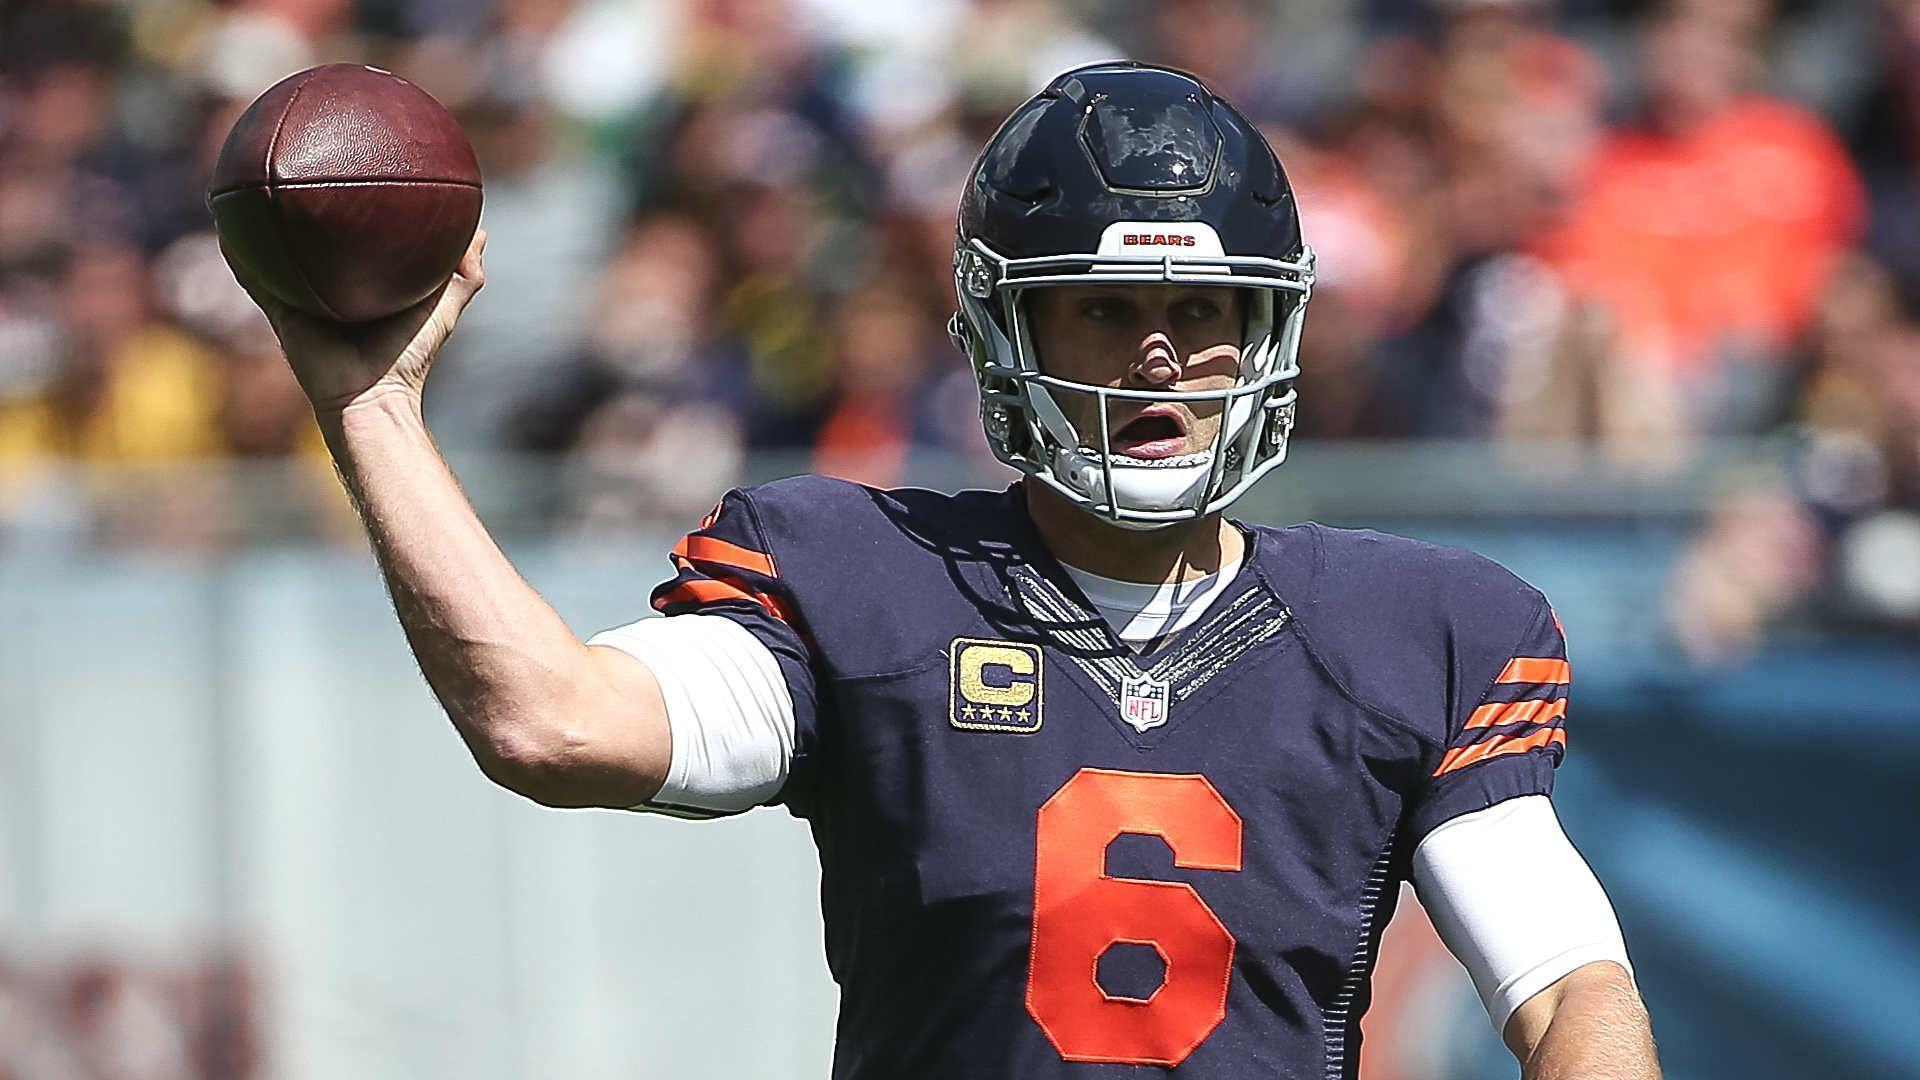 Jay Cutler's late interception costs the Bears against the Packers